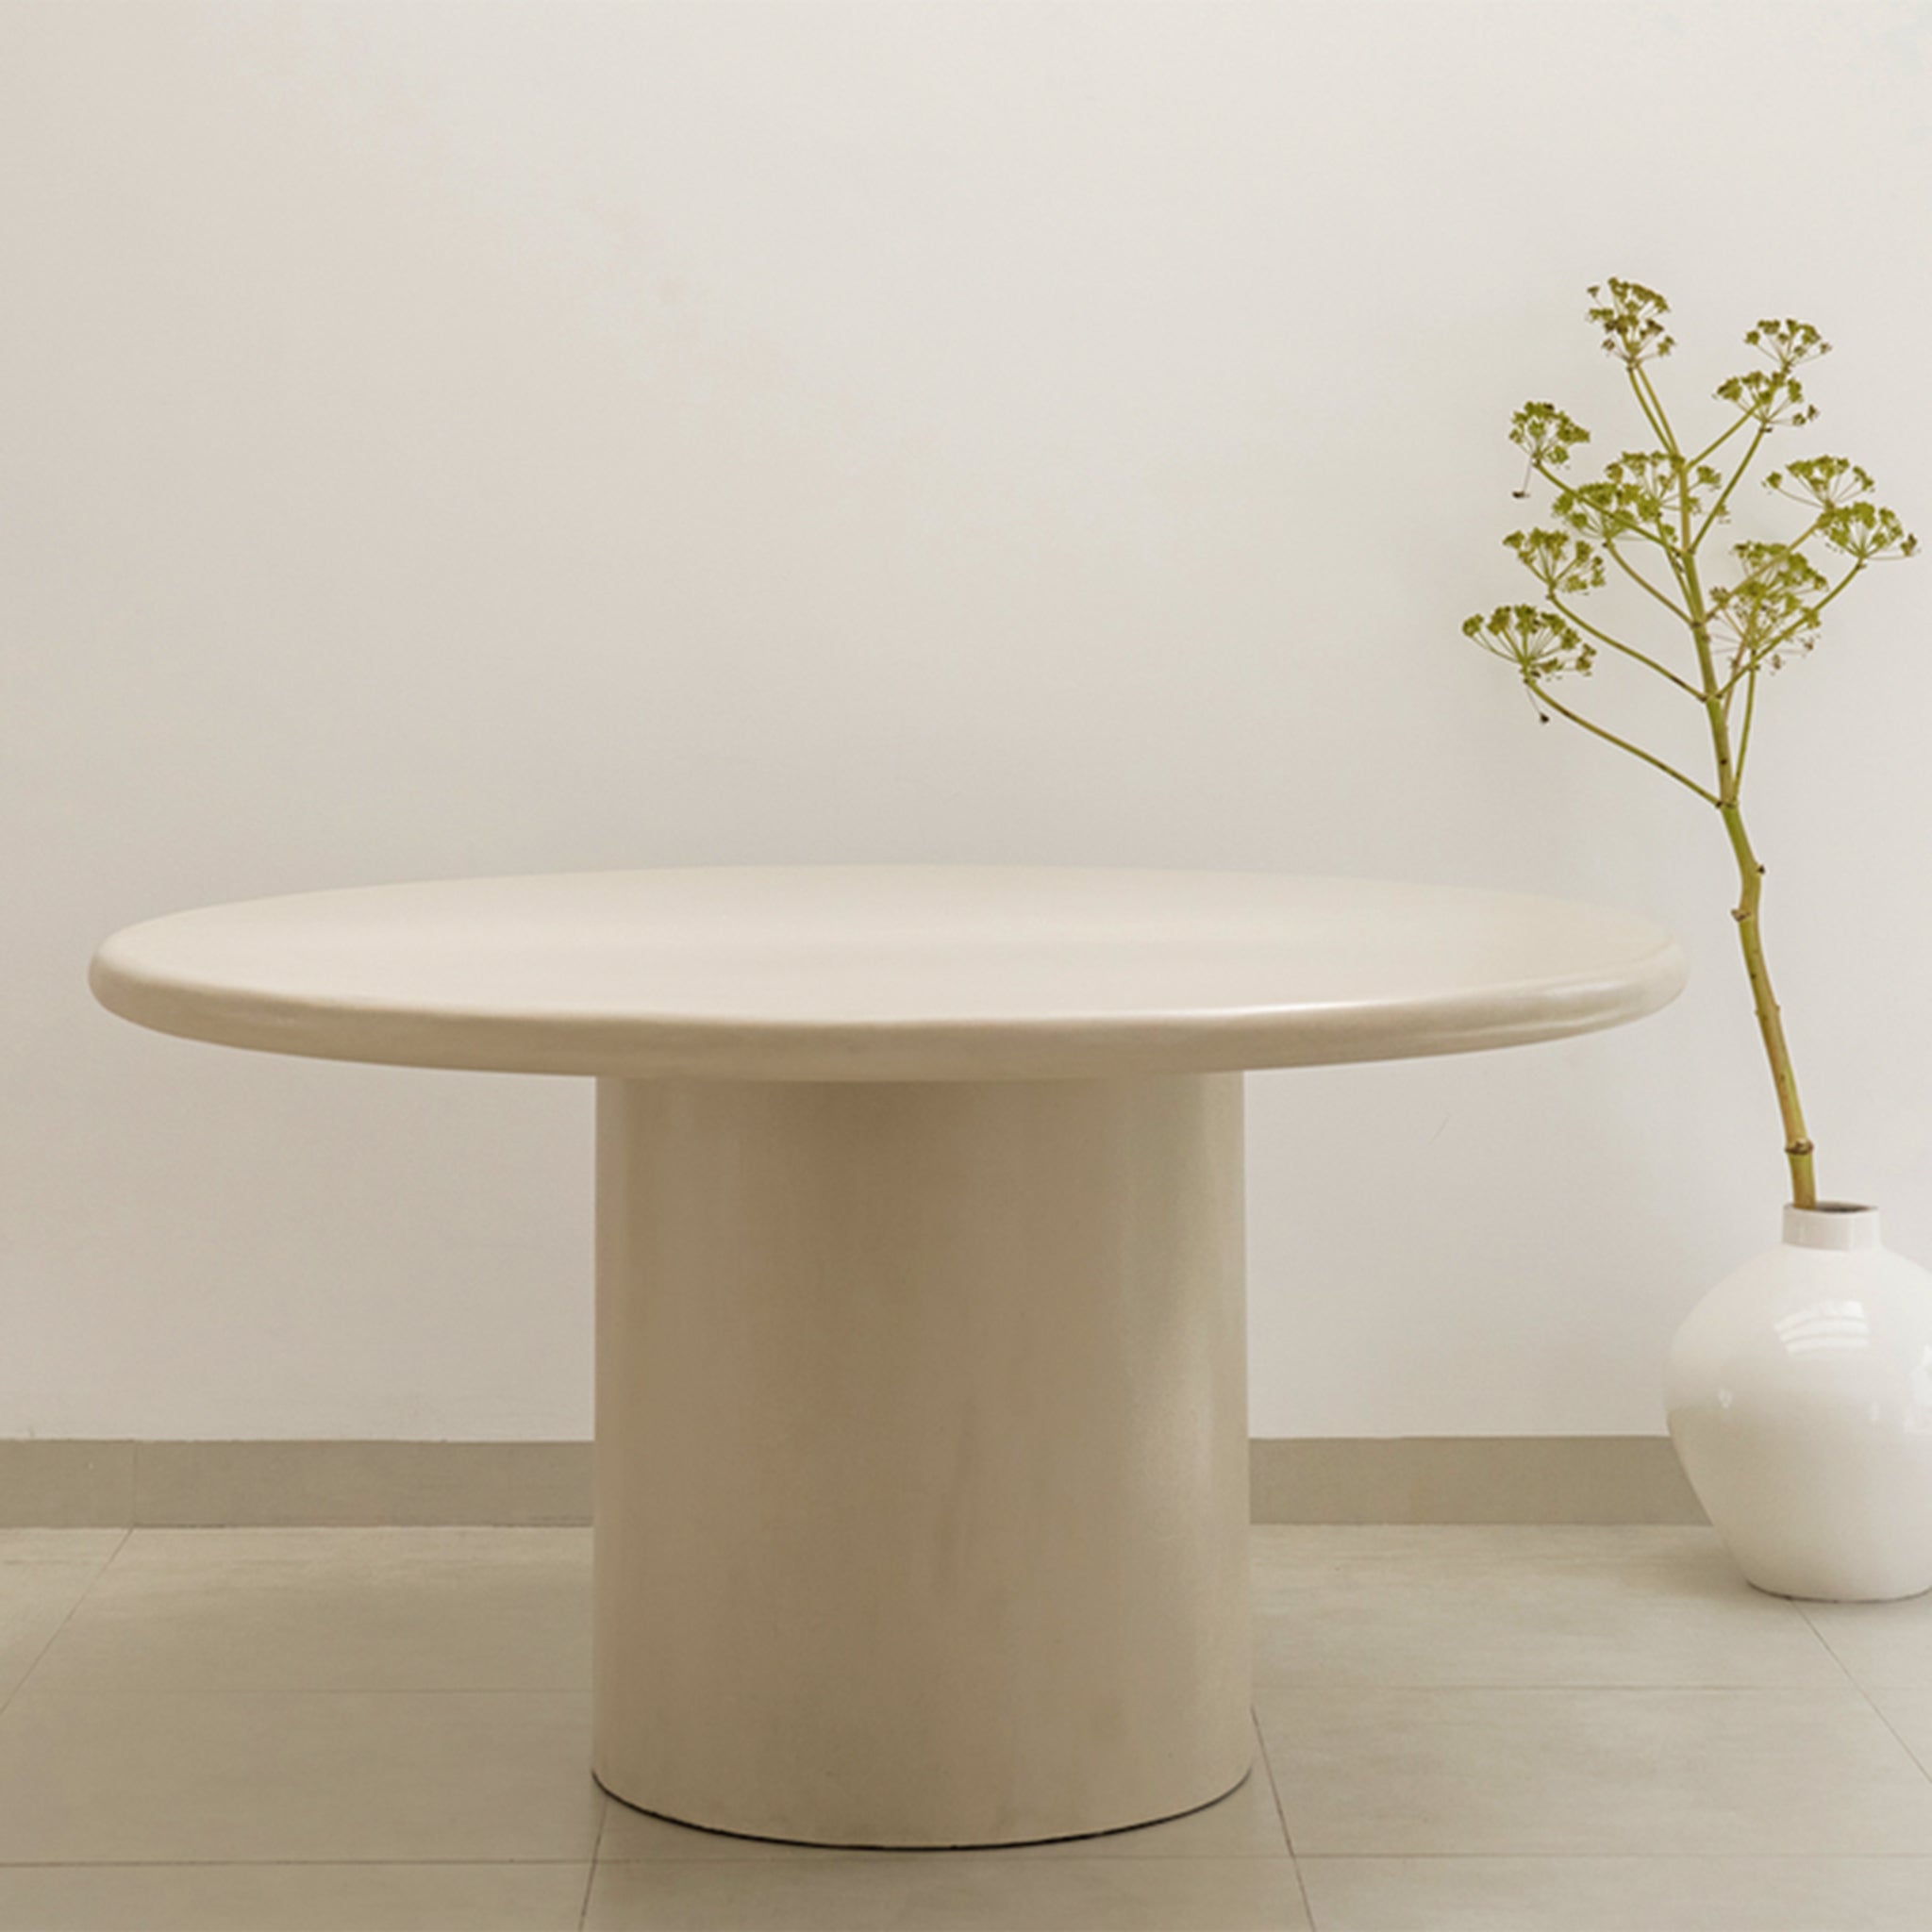 Chic round dining table with a smooth finish and sturdy design